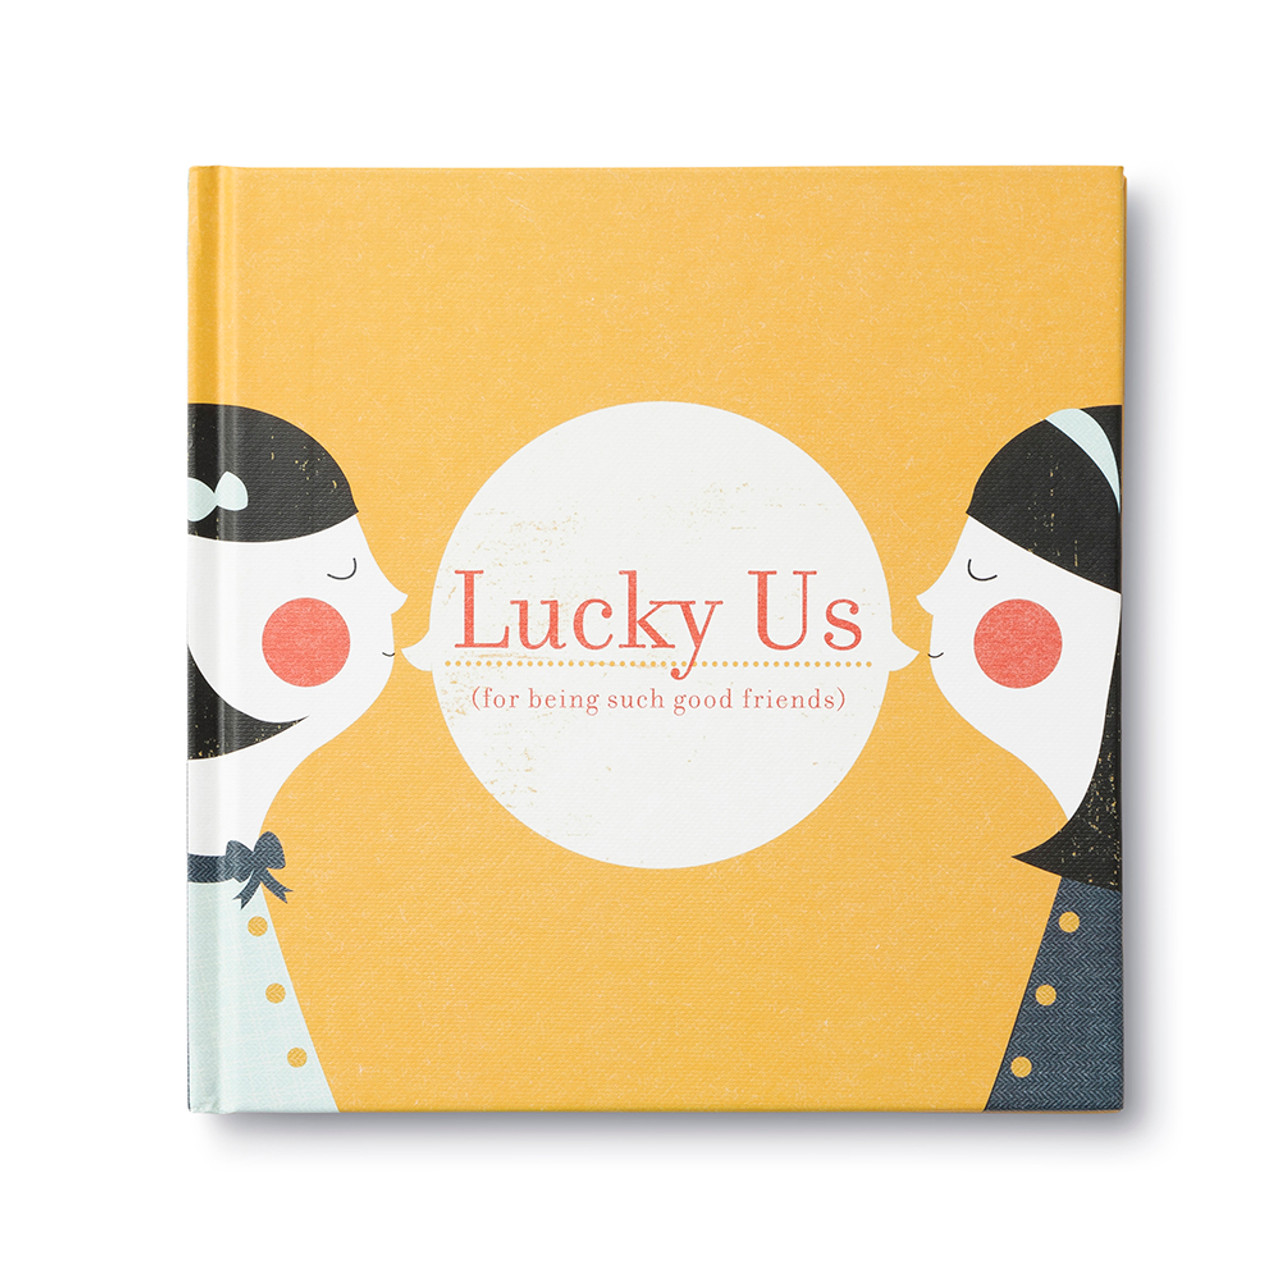 lucky us book review